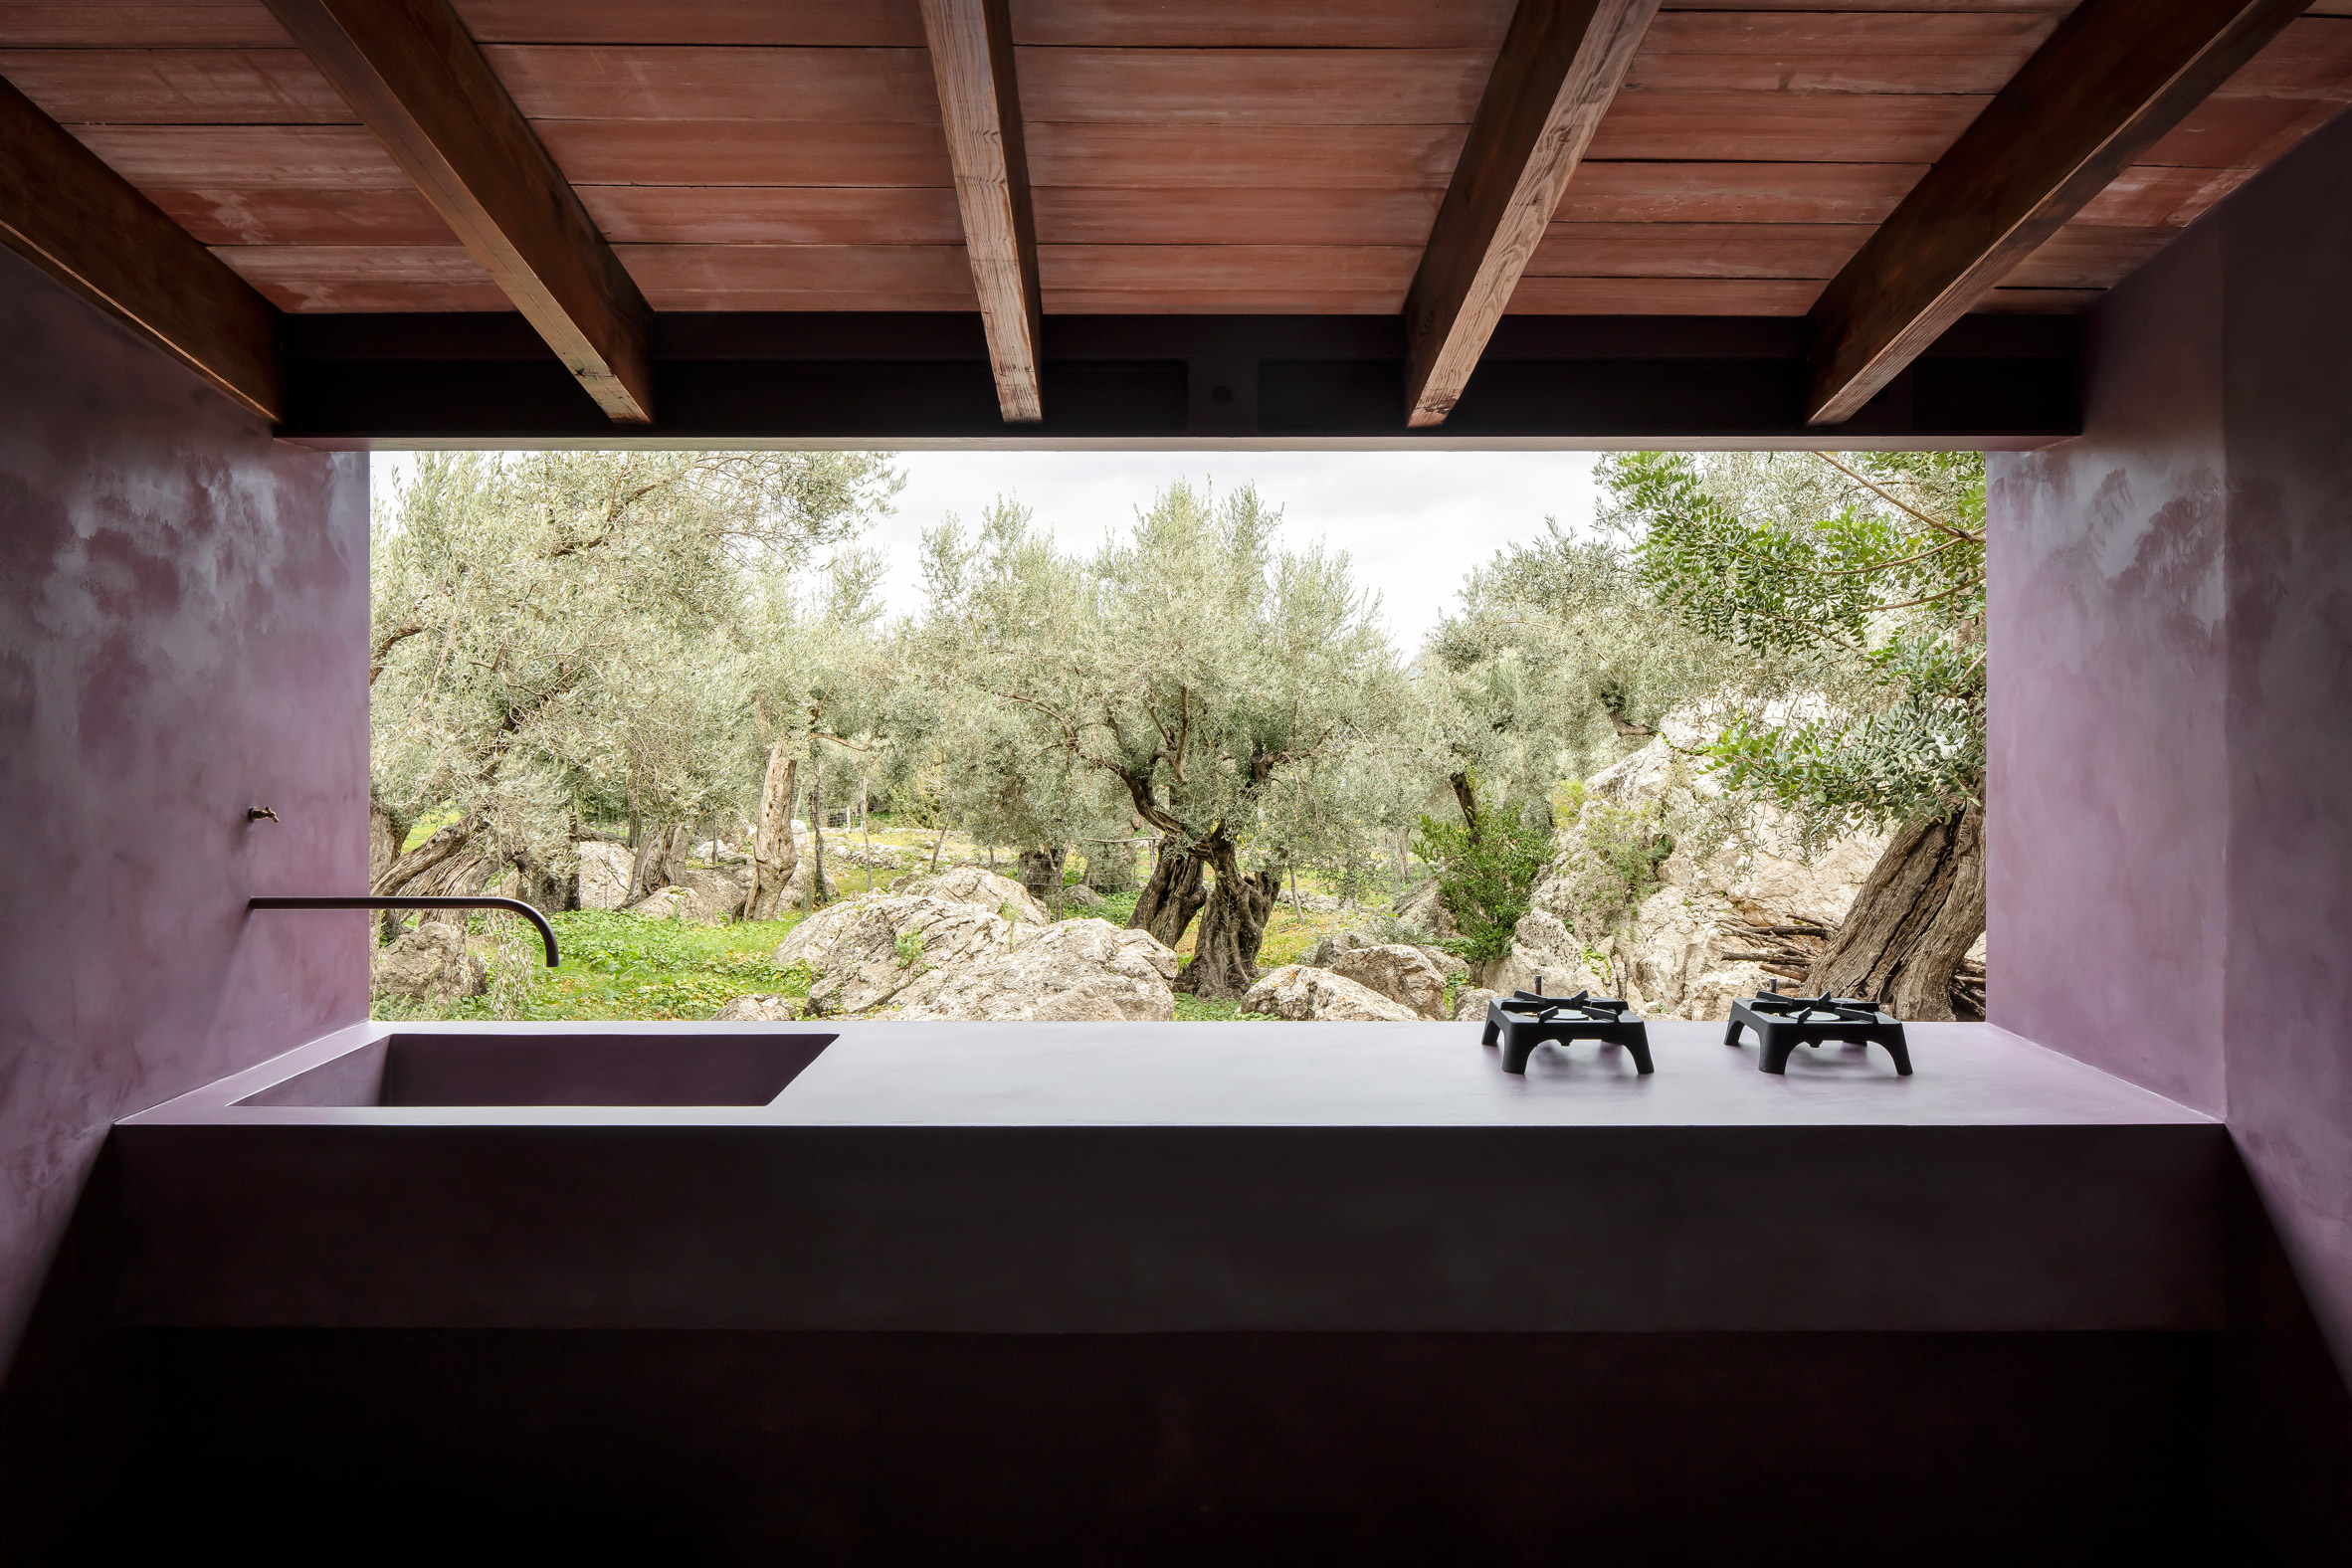 Sink and stover overlooking an olive grove